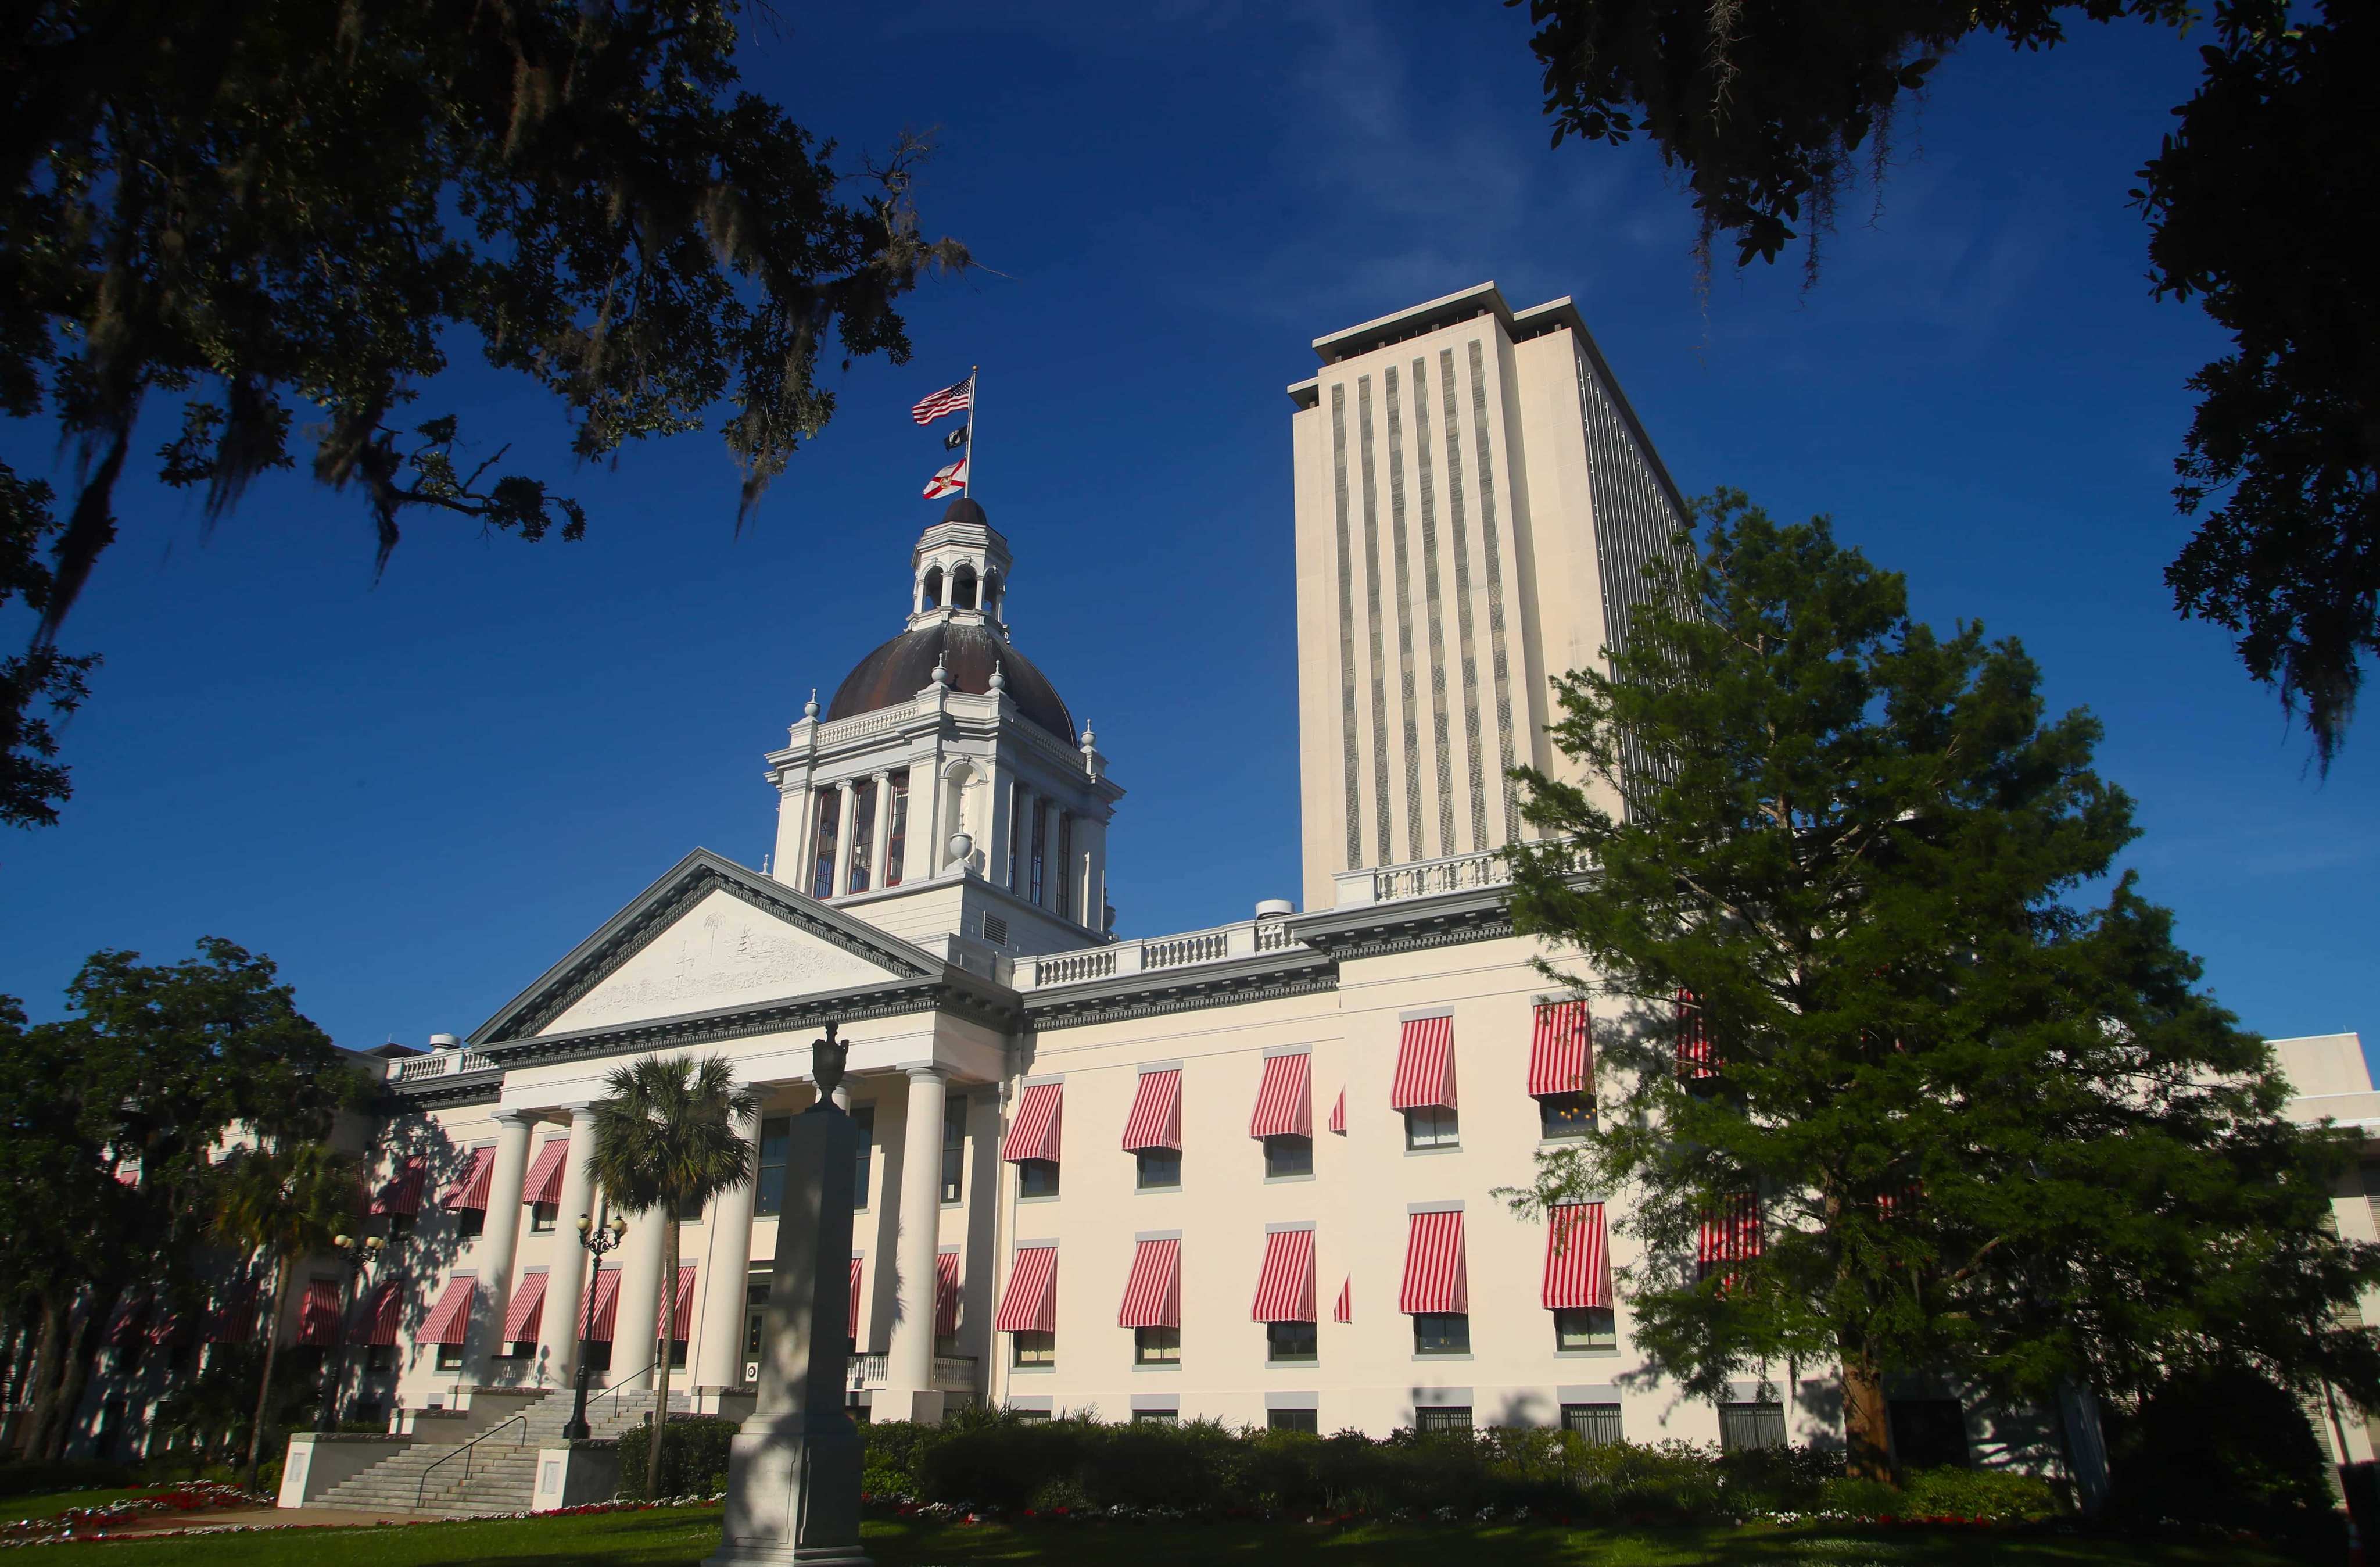 An American flag flies over the Florida Capitol, Tuesday April 23, 2019 in Tallahassee, Fla. The Florida Legislature is in its final two weeks of session. (AP Photo/Phil Sears)